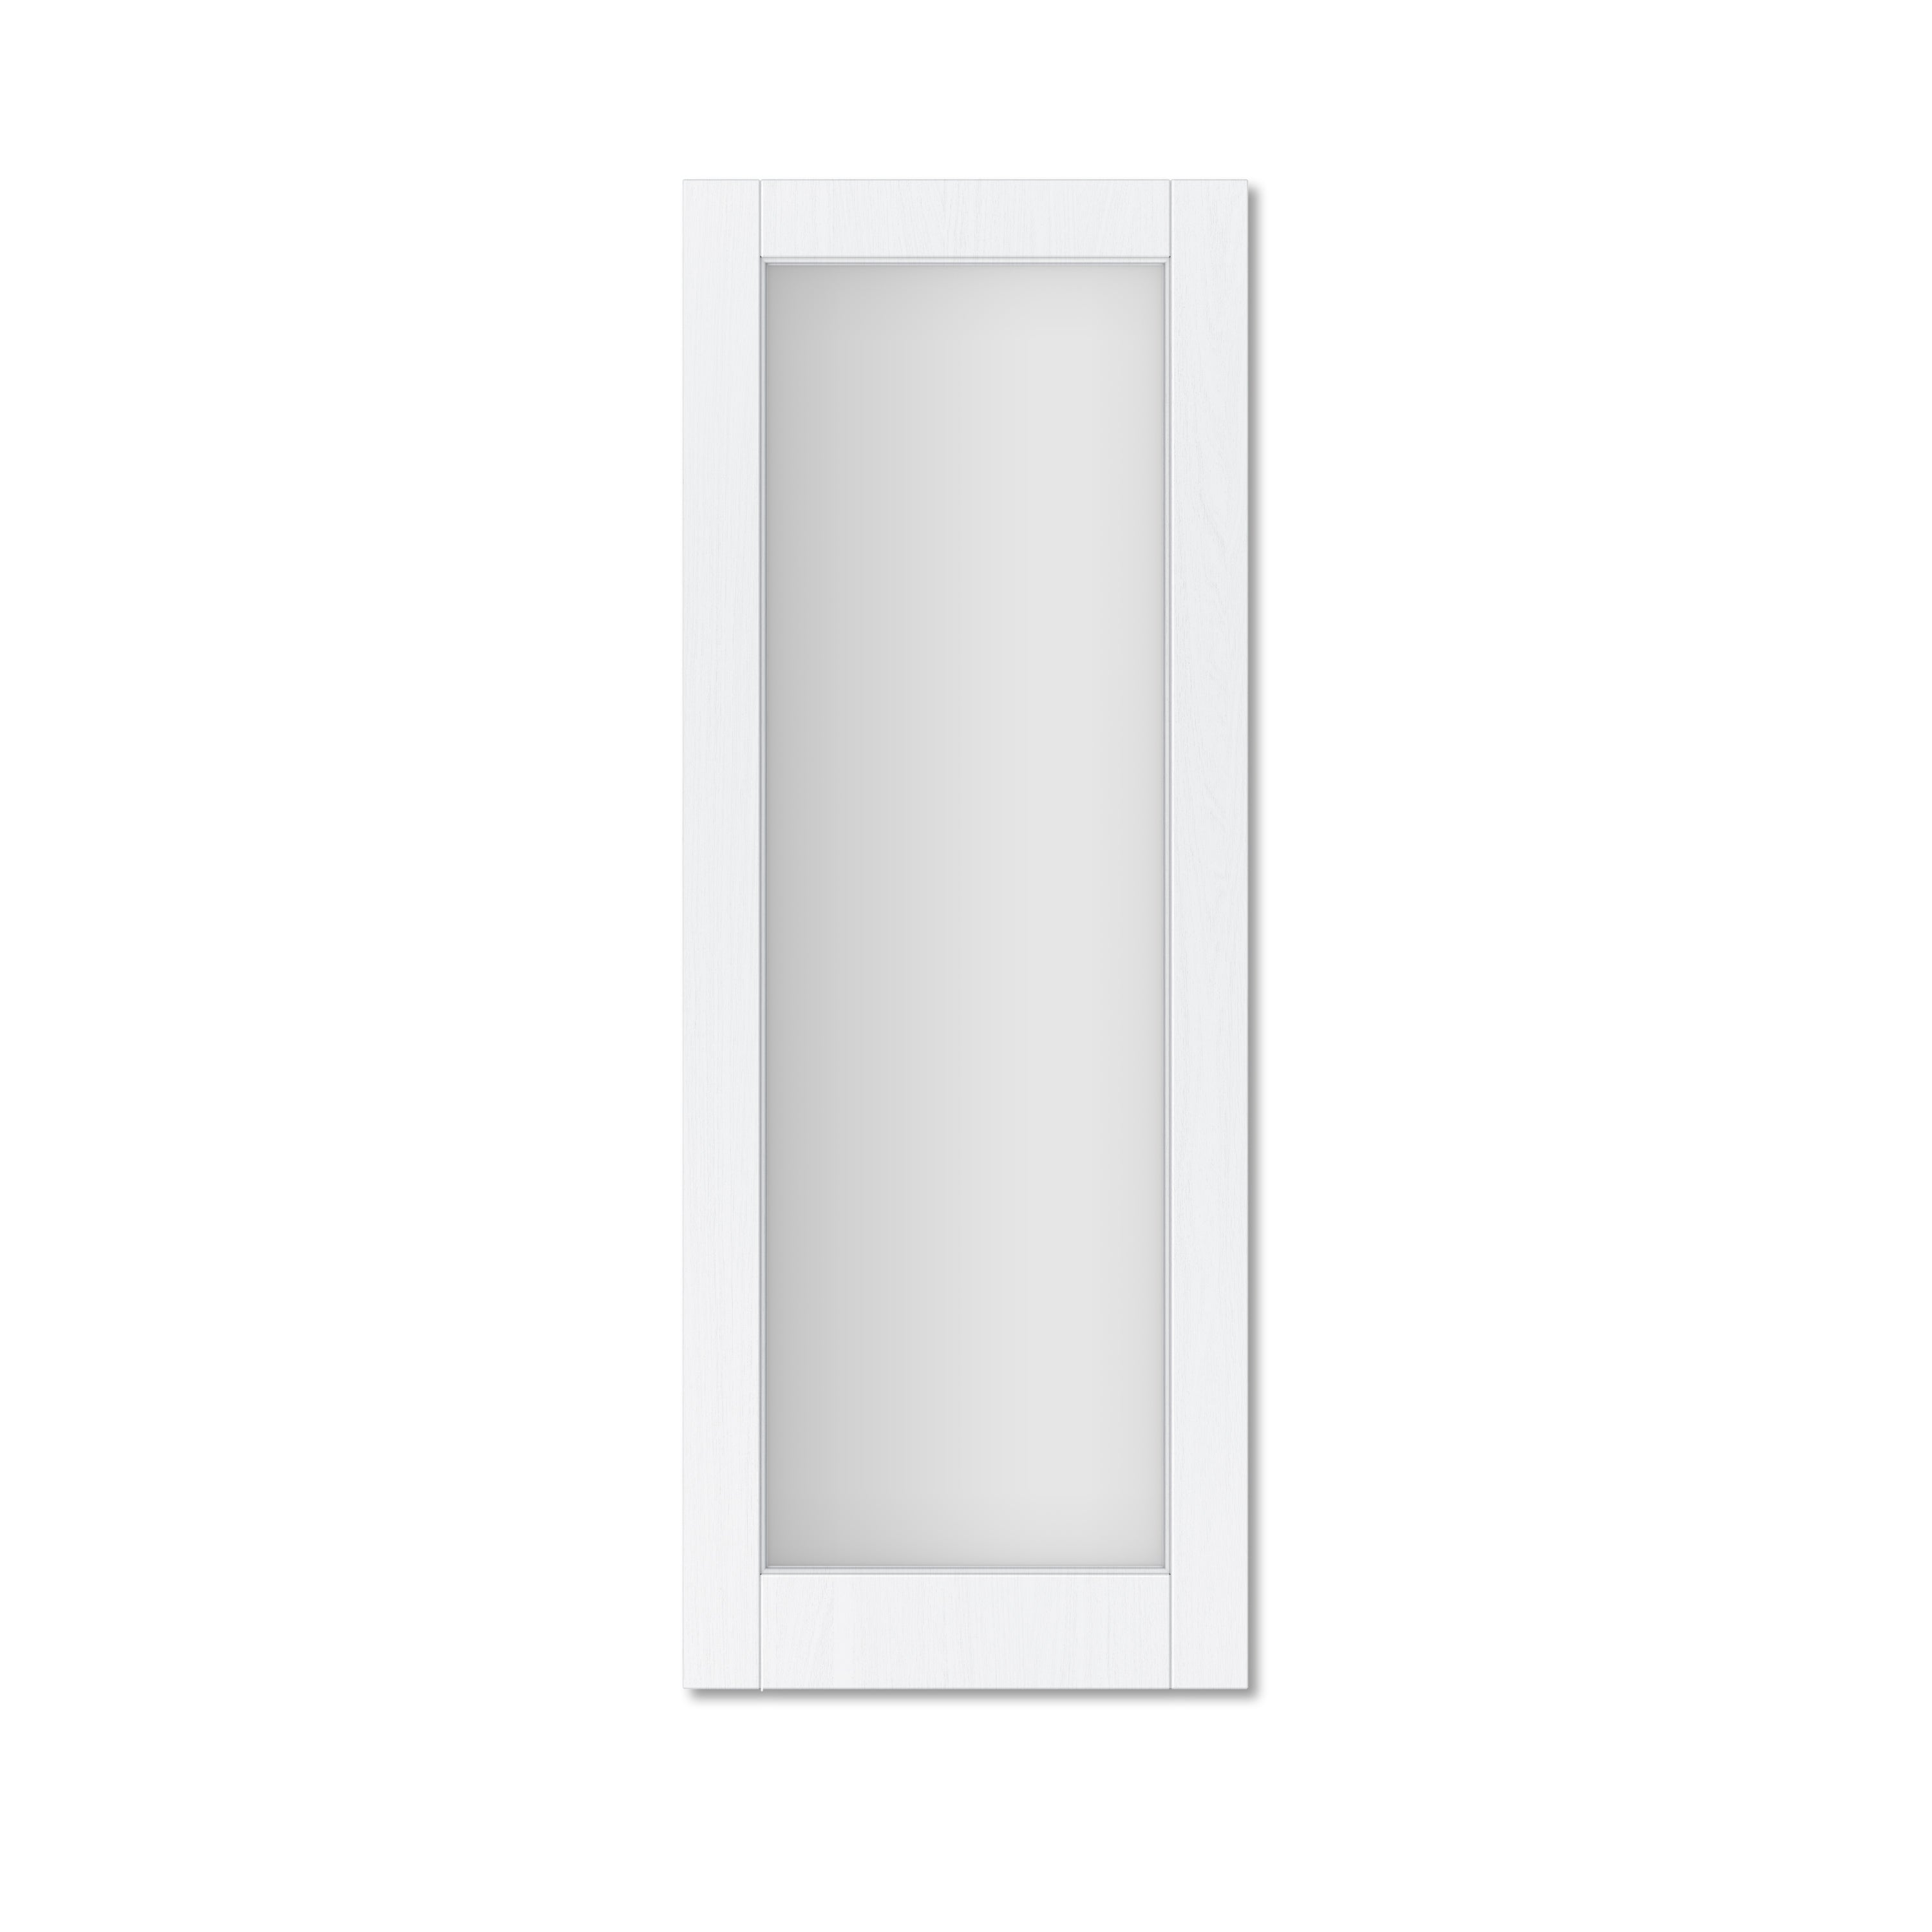 Ark Design Frosted Glass Door Slab with/without Prehung Kit, White